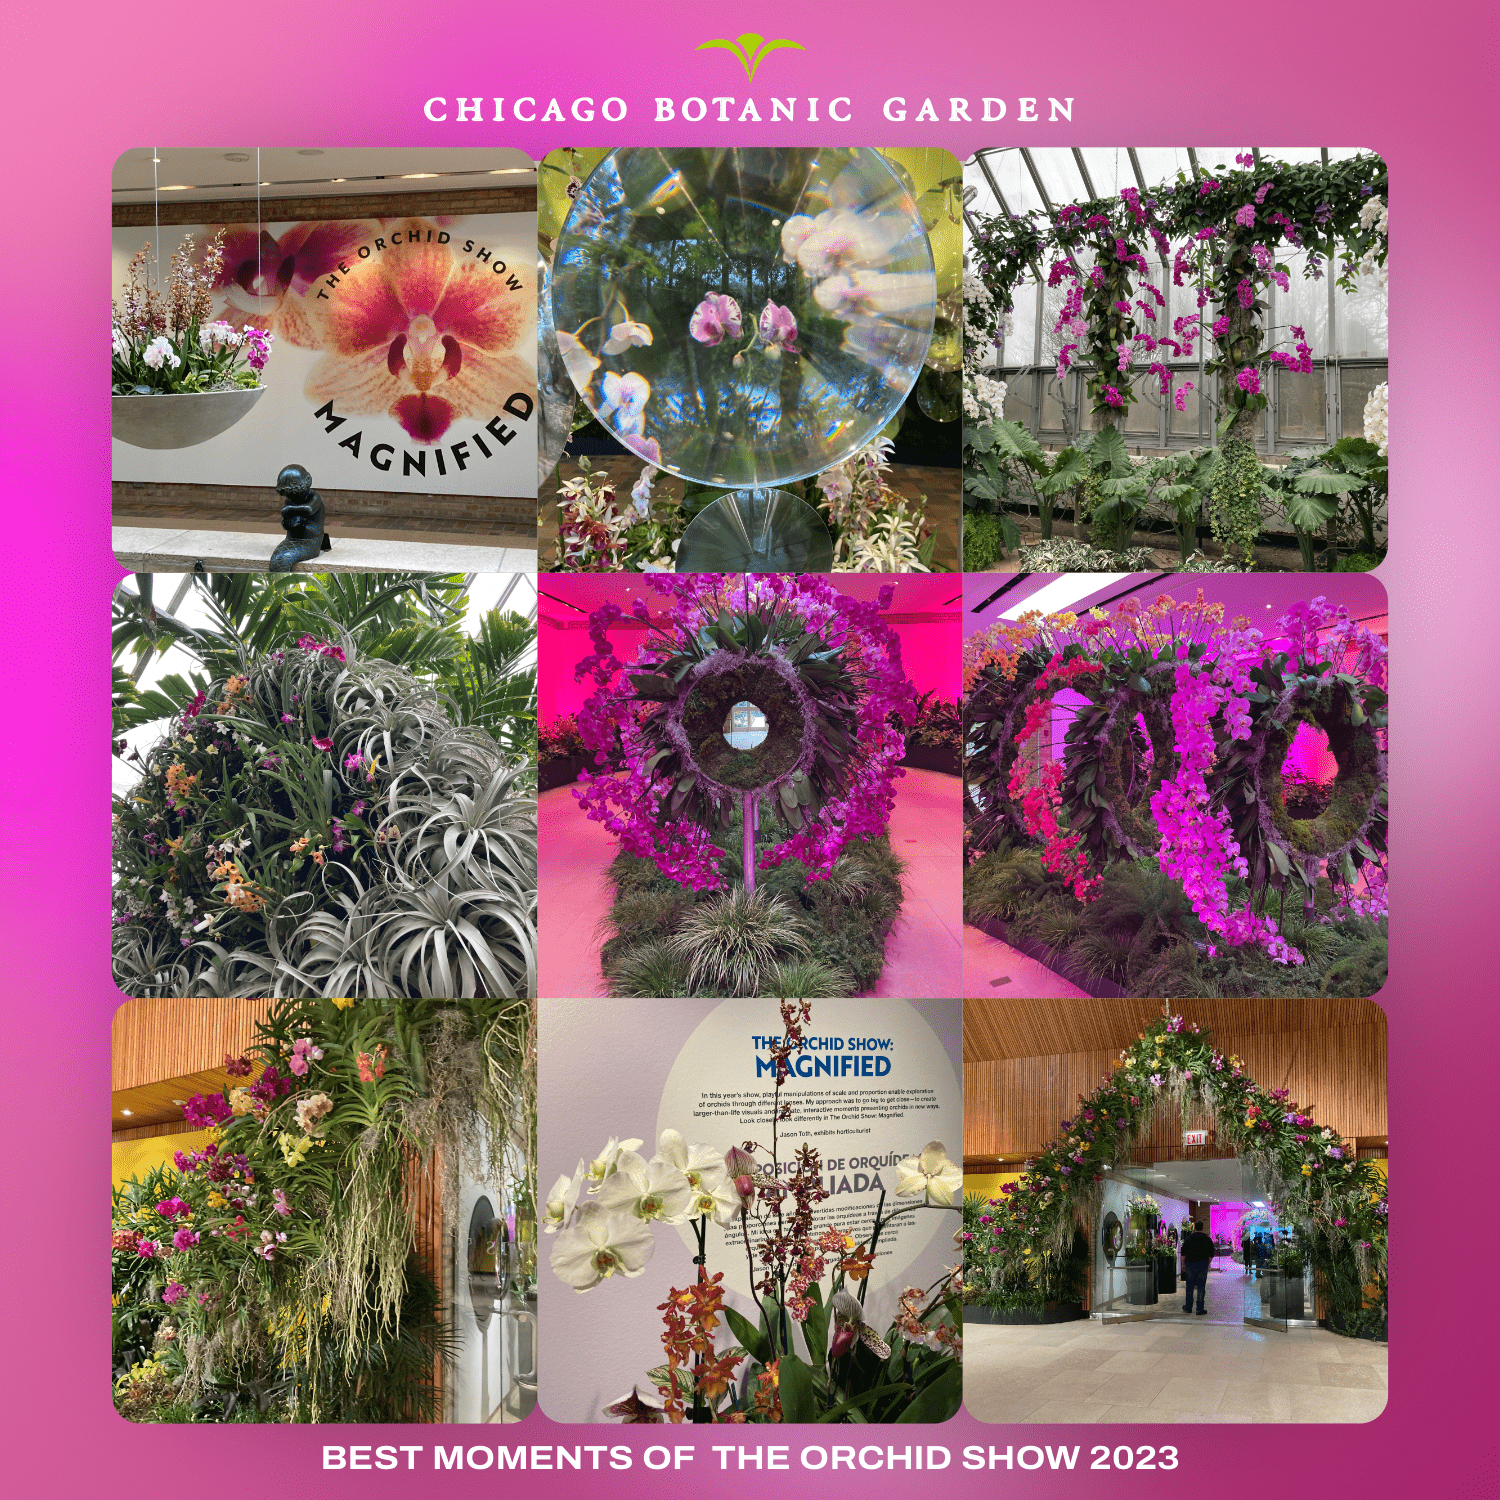 Best Nine Moments Of The Orchid Show at the Chicago Botanic Garden 2023